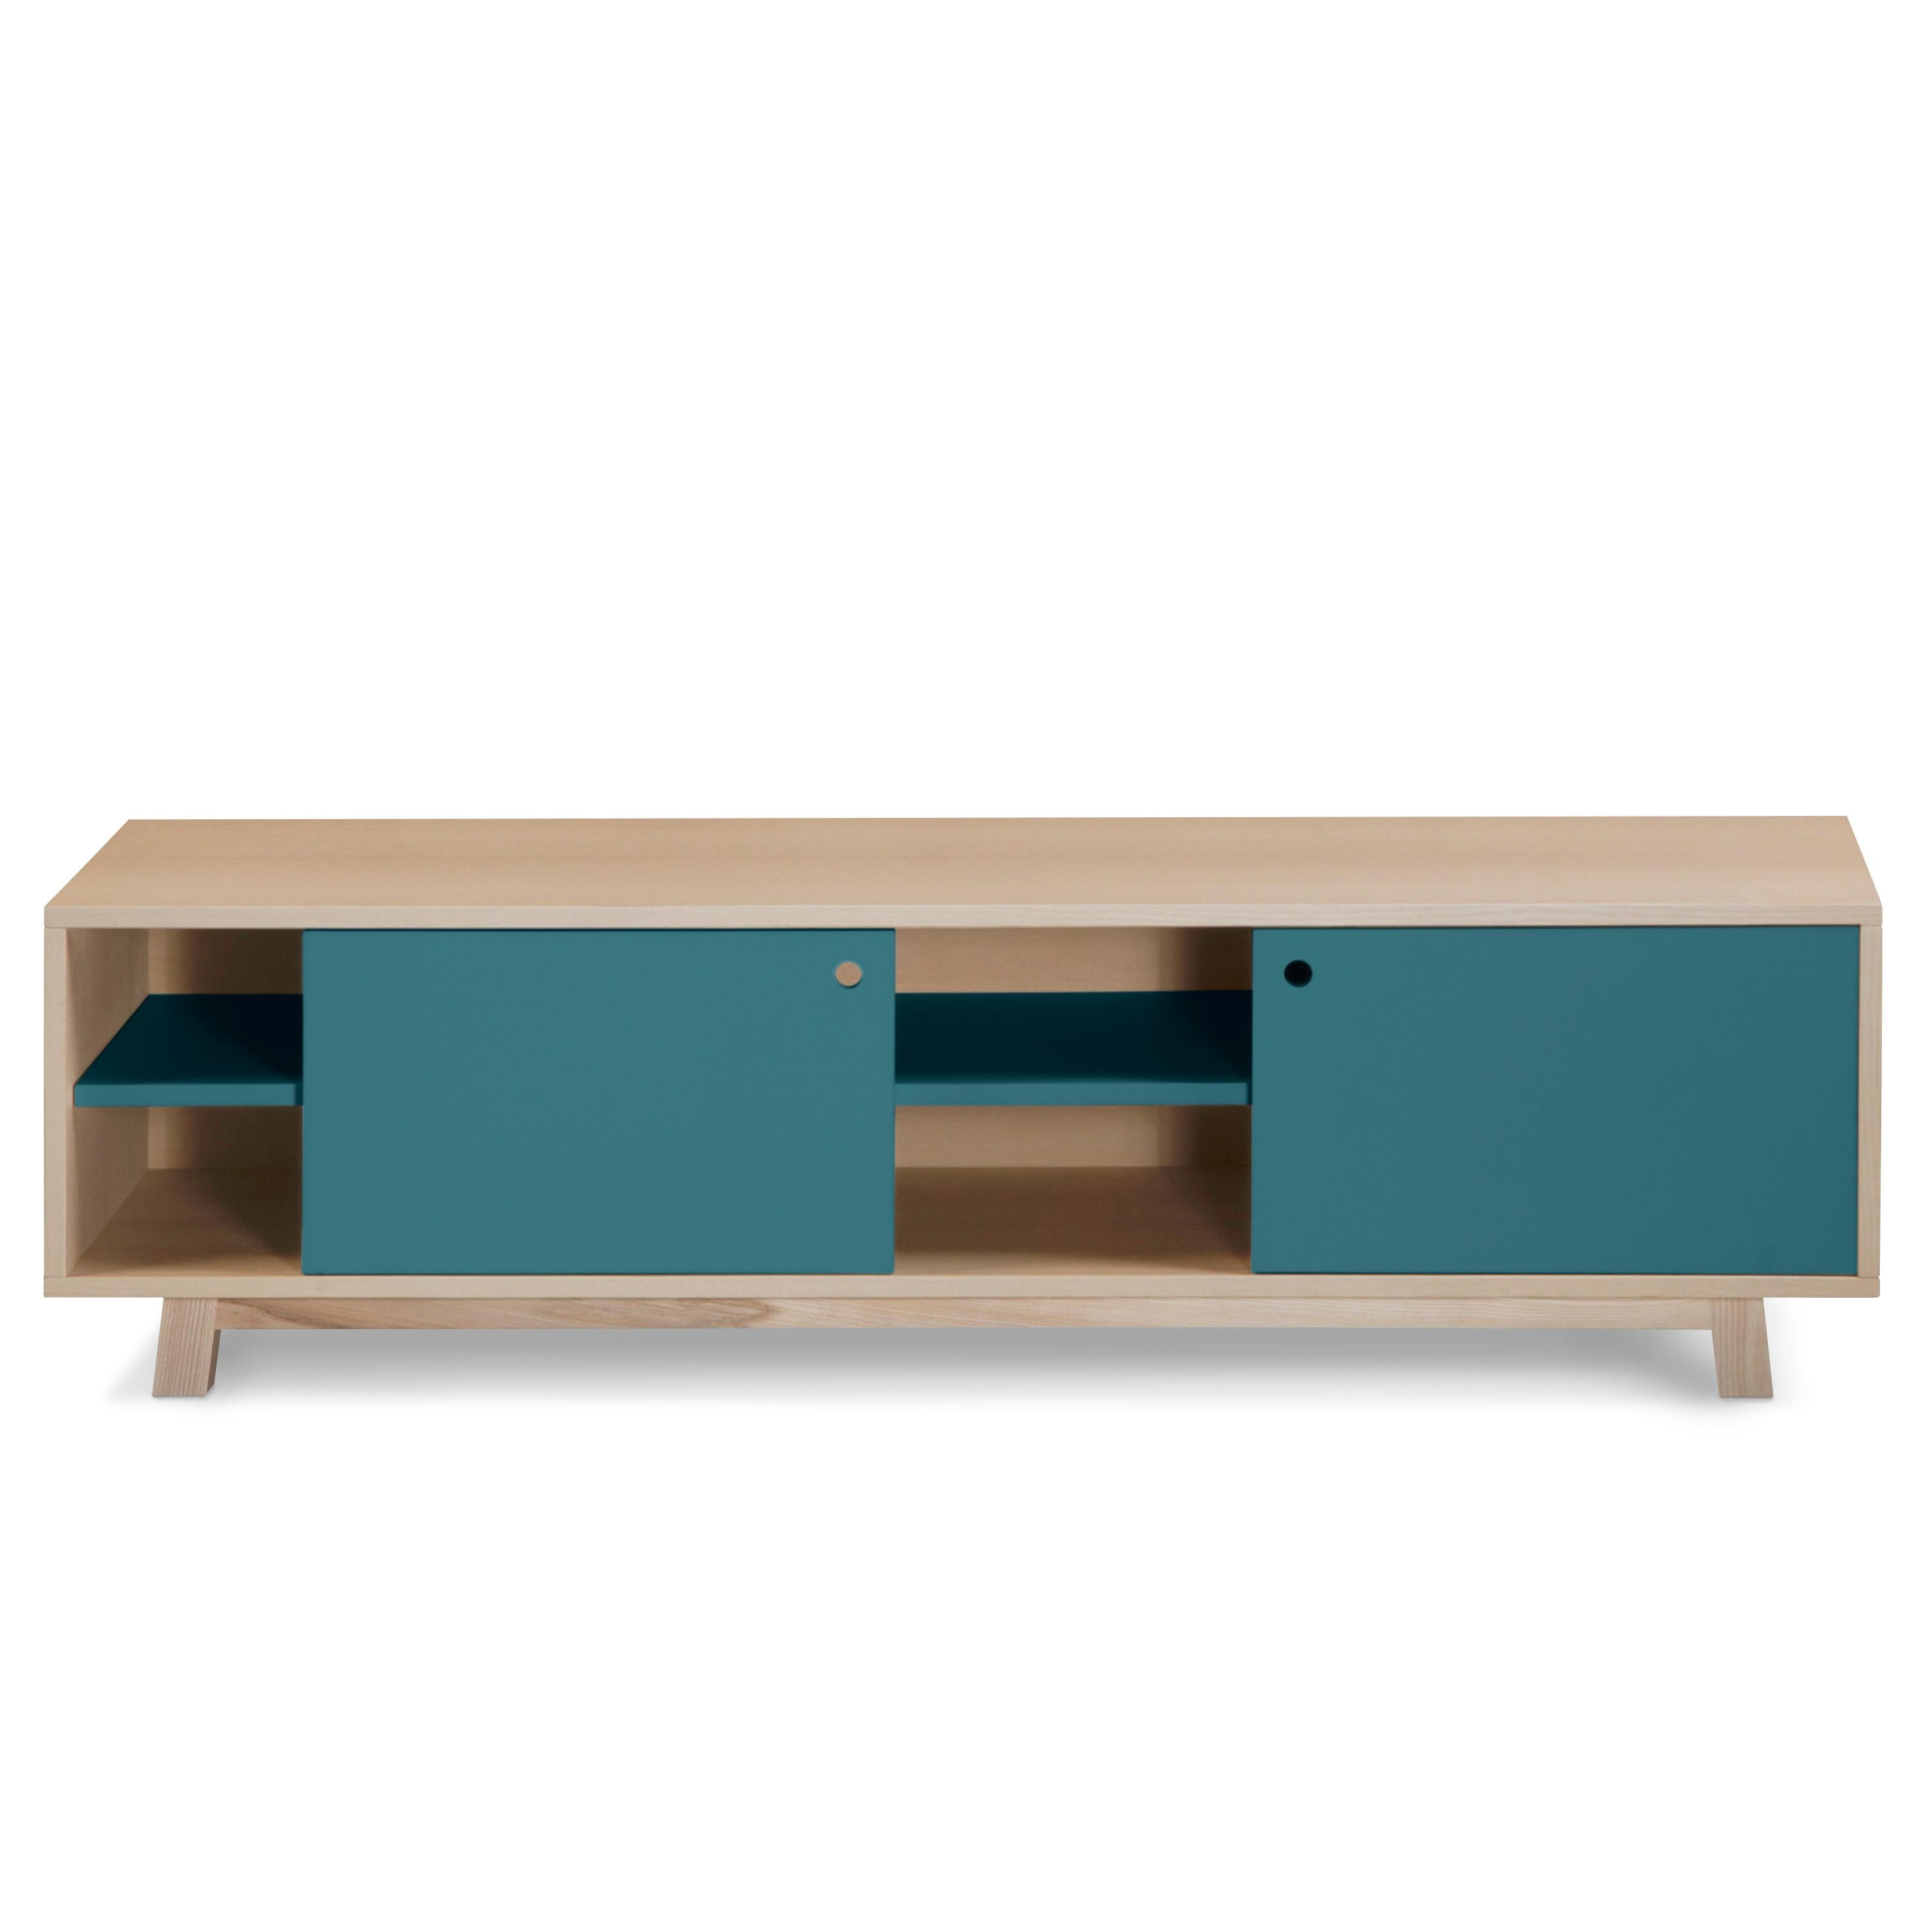 Ash TV Cabinet with 2 sliding doors, designed by Eric Gizard, Paris - bespoke For Sale